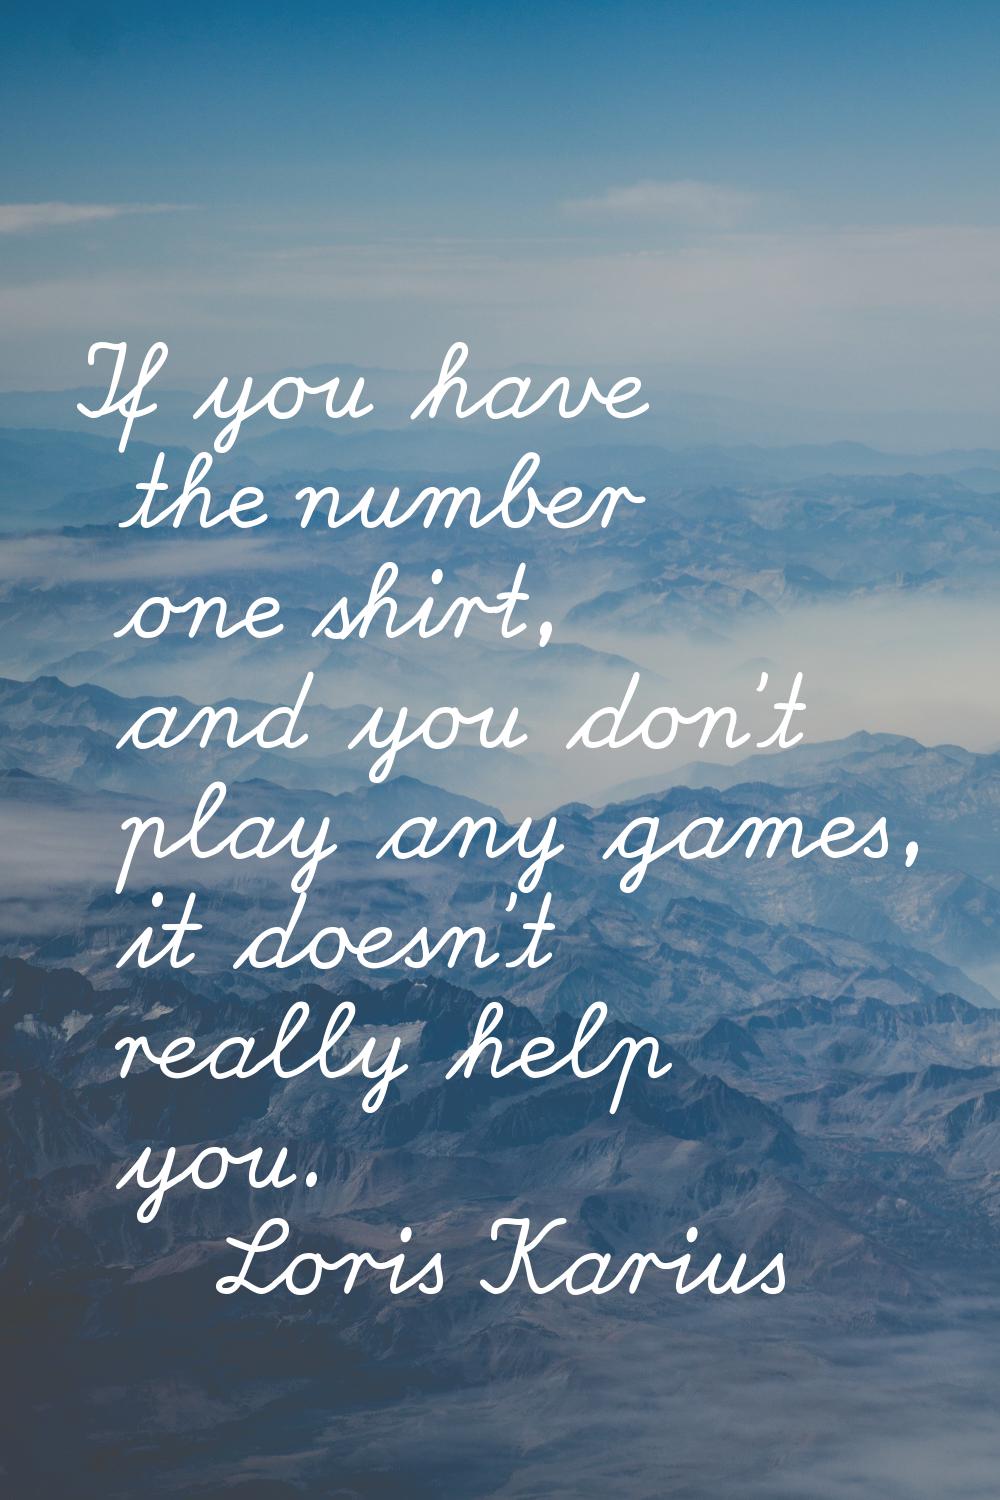 If you have the number one shirt, and you don't play any games, it doesn't really help you.